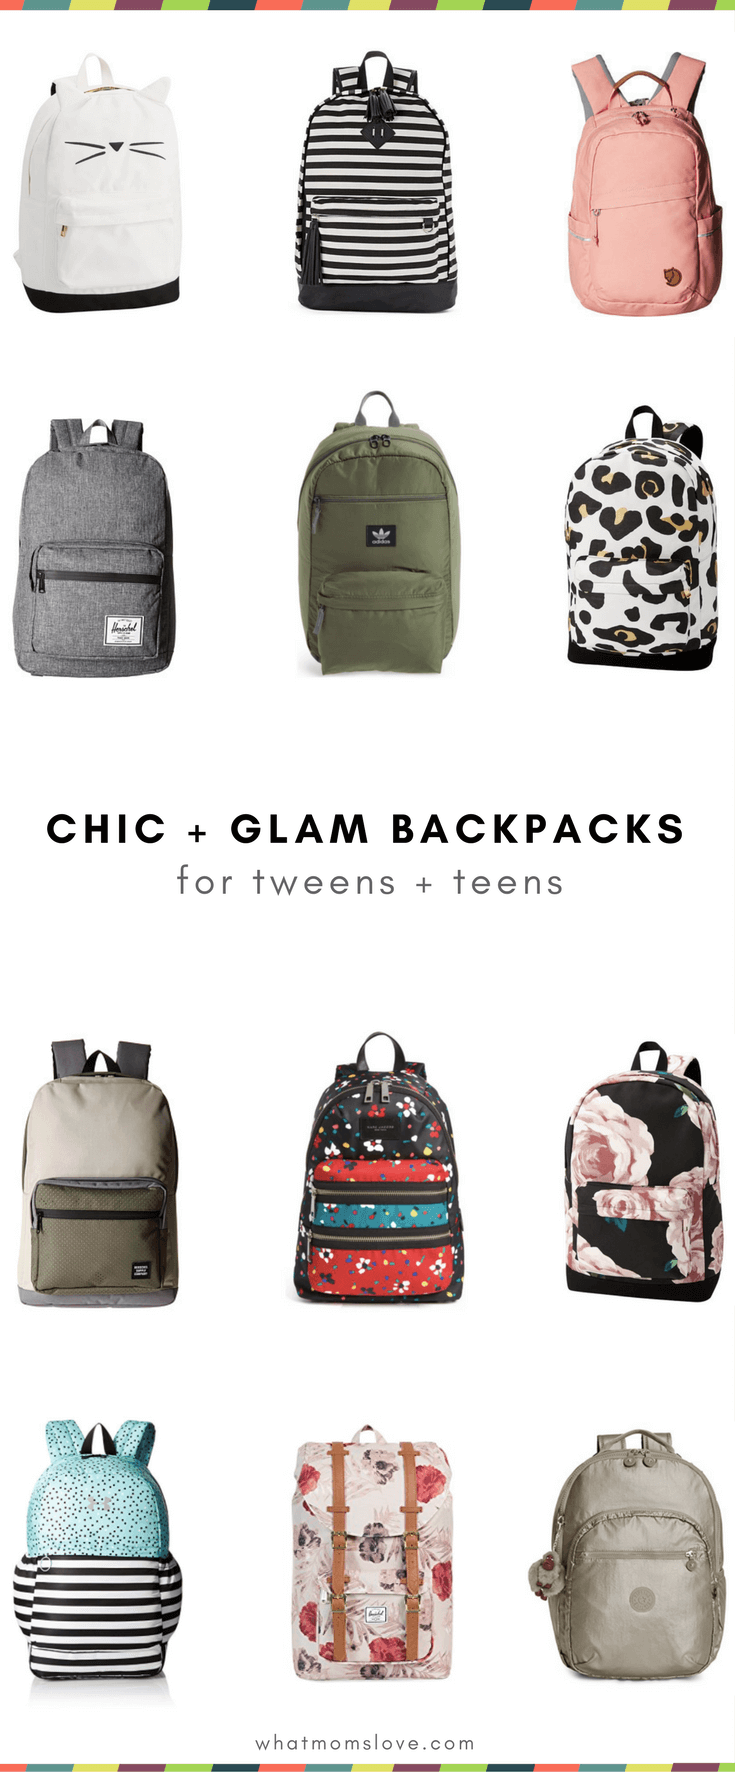 Best Backpacks for Tweens and Teens for Back to School - Chic Glamorous Minimalist